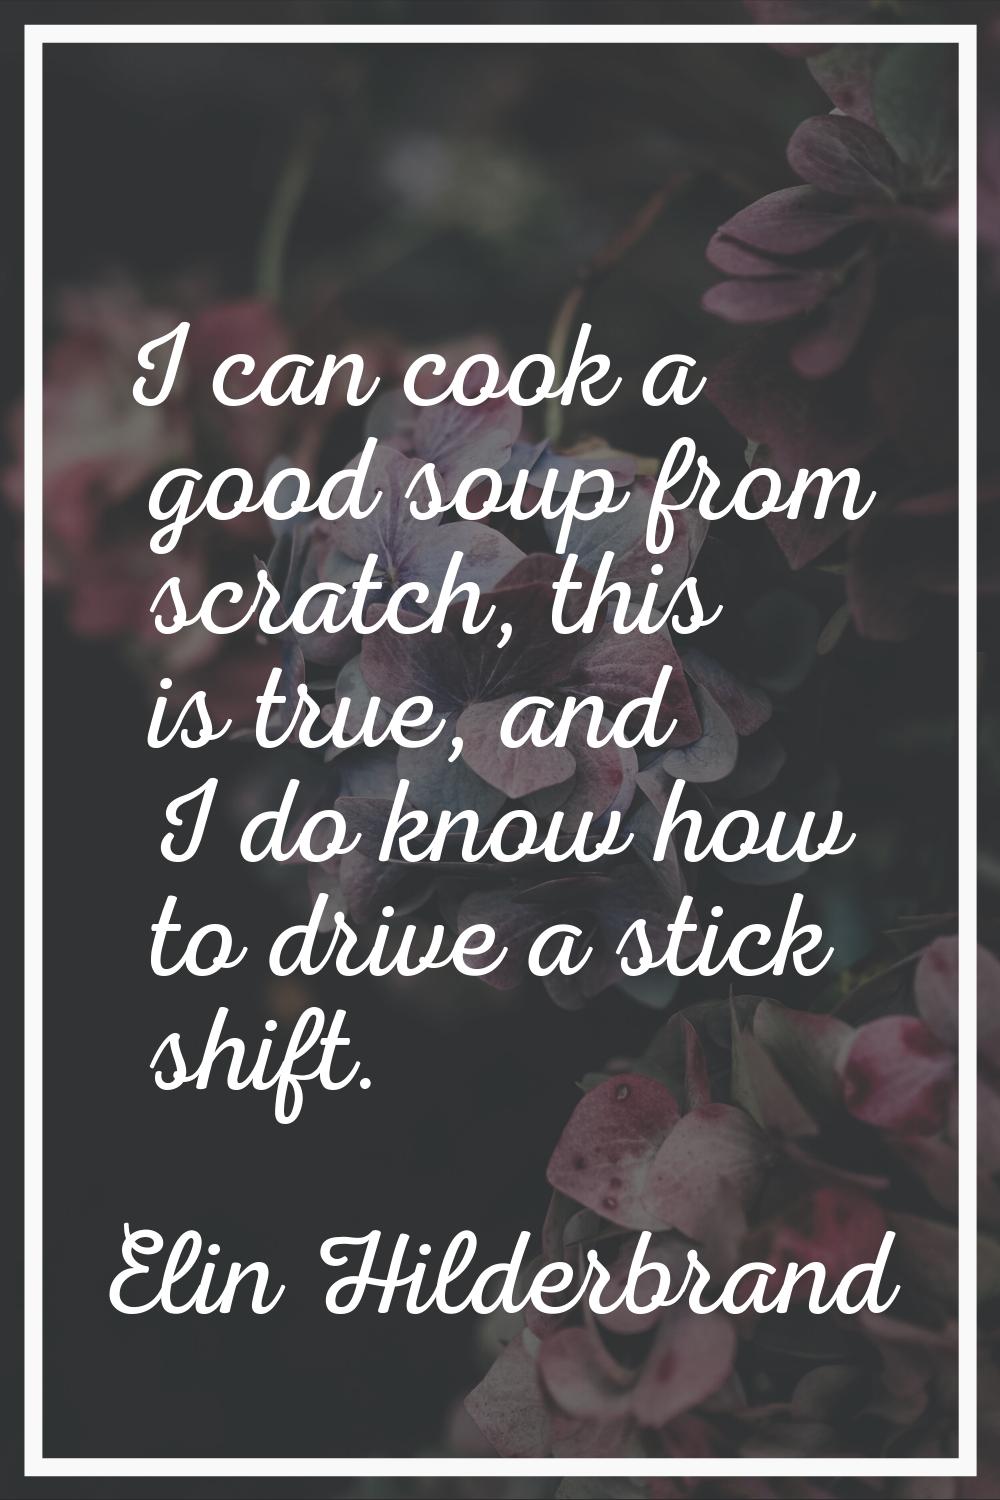 I can cook a good soup from scratch, this is true, and I do know how to drive a stick shift.